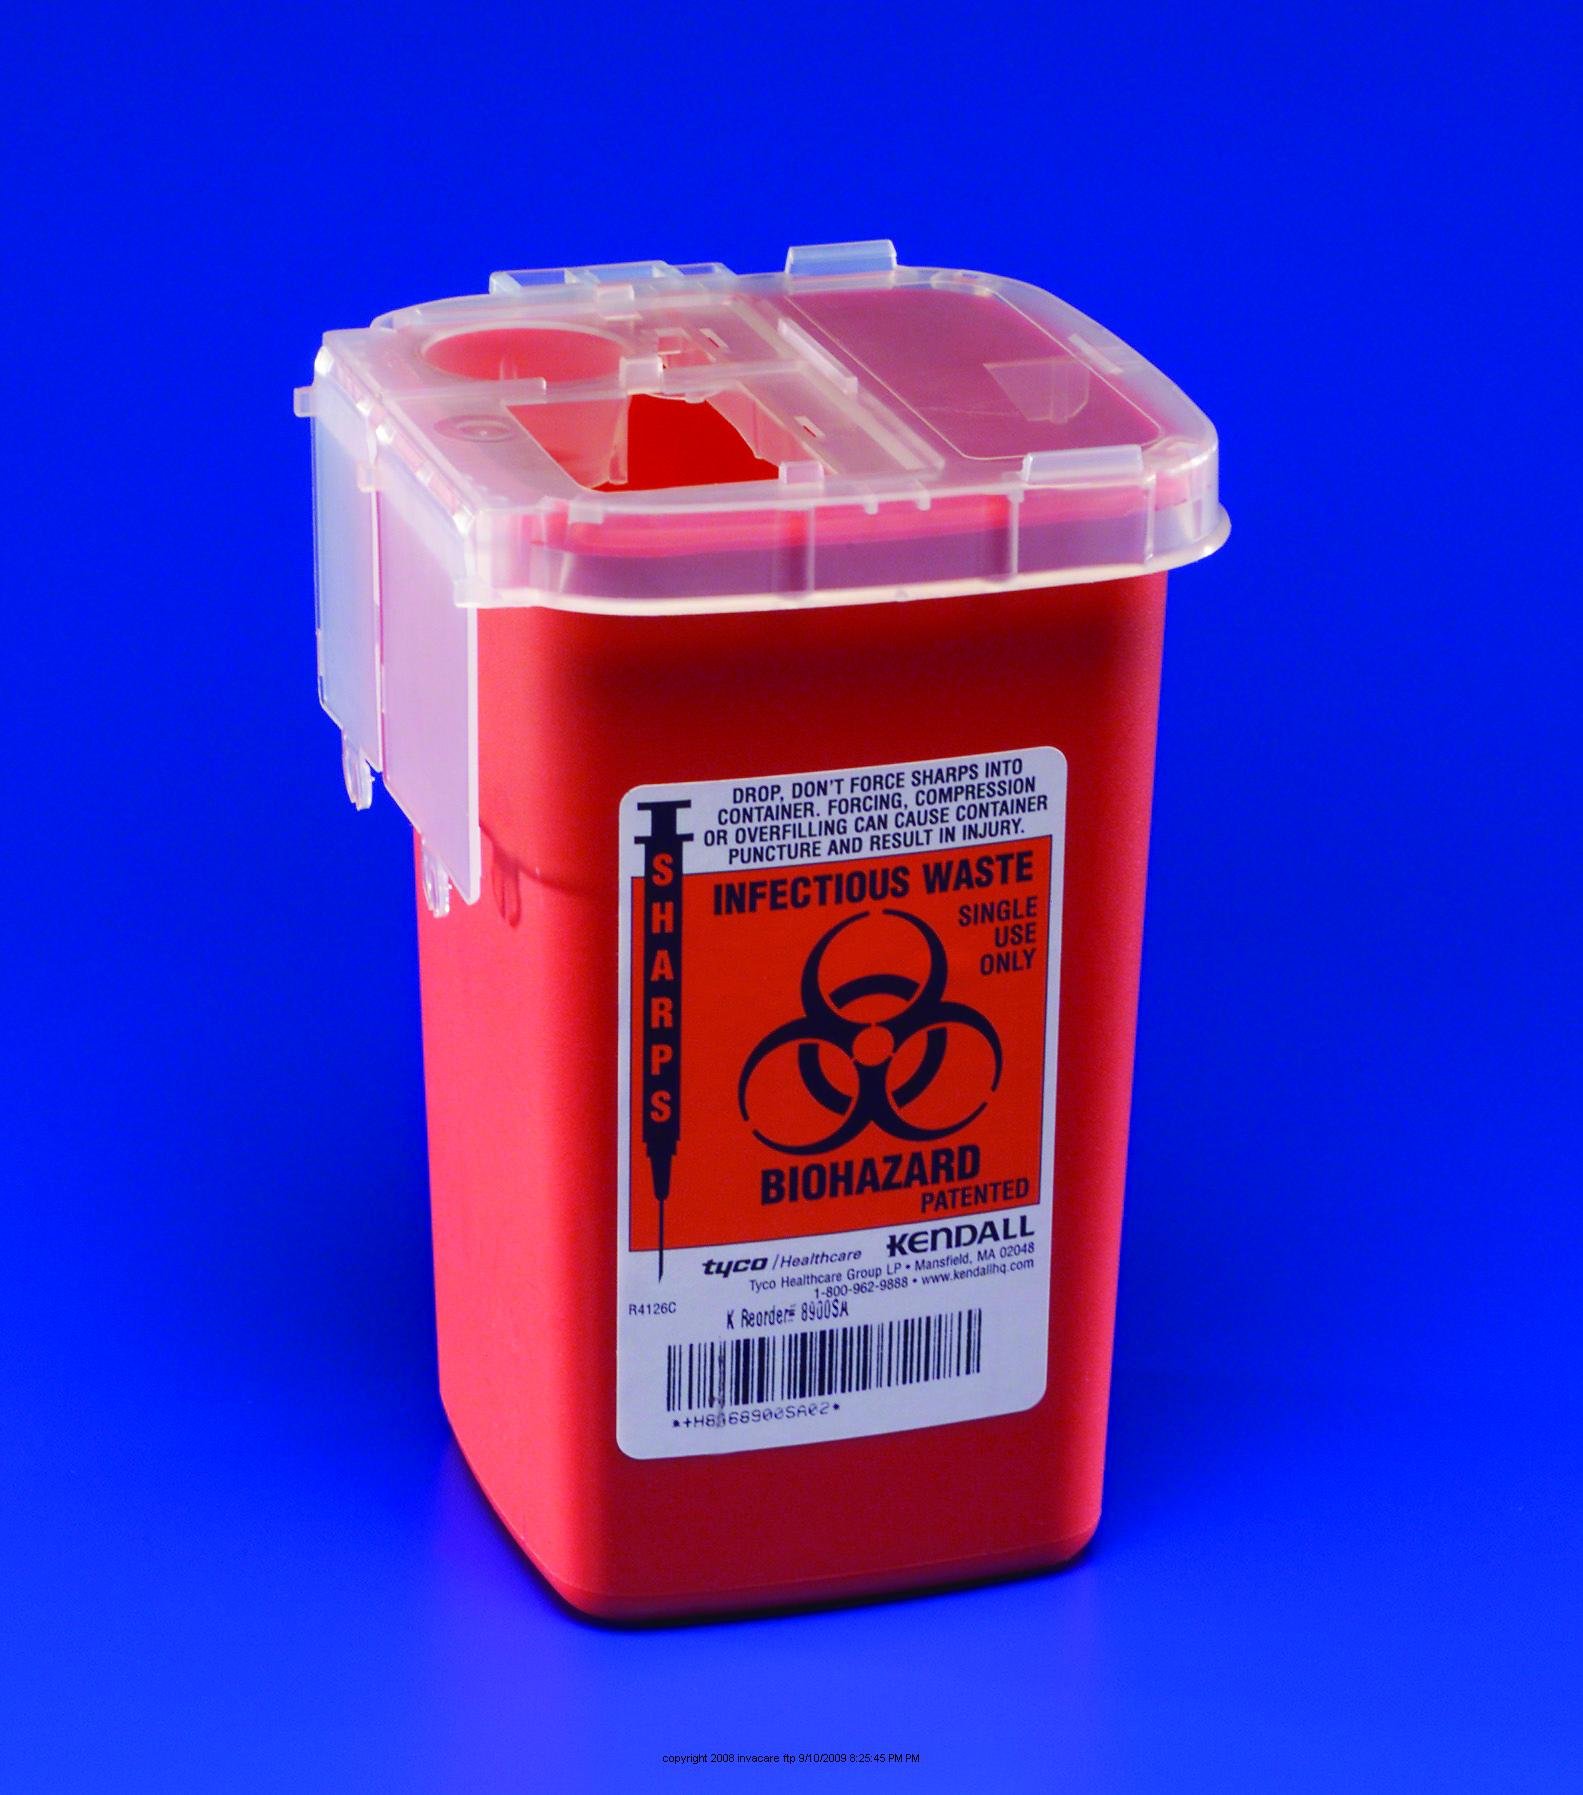 SharpSafety Autodrop Phlebotomy Container, Sharps Cntnr Red 1 Qt Liv Hi, (1 EACH, 1 EACH)